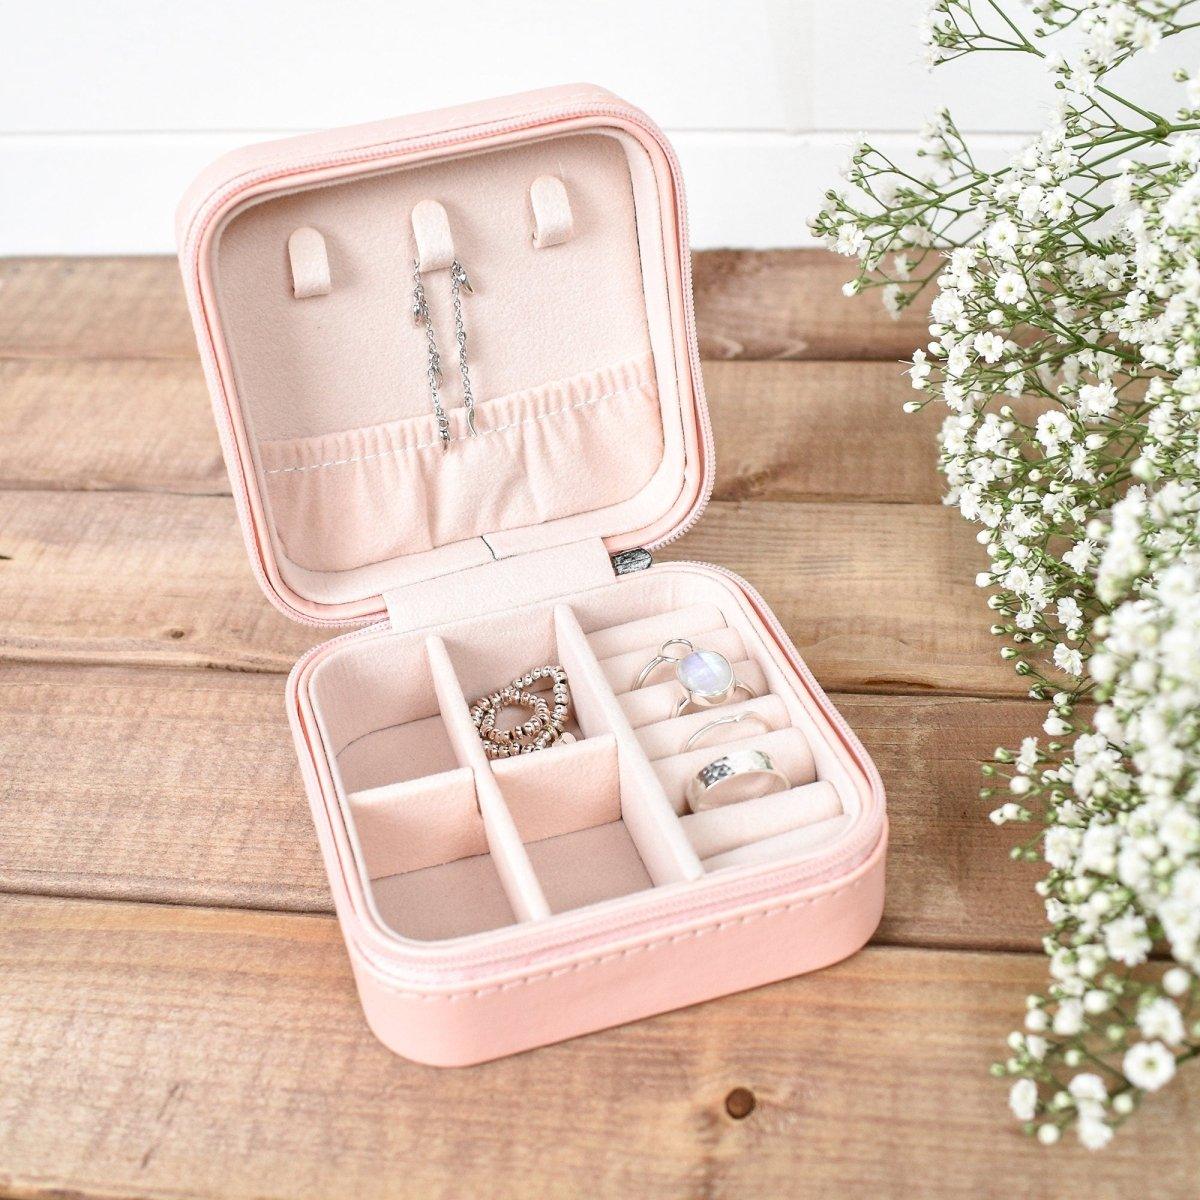 Personalised Mini Jewellery Box, Travel Jewellery Case, Bridesmaid Gift, Mothers Day, Jewellery Orangiser Storage, Travel Case, Gift for Her - Amy Lucy